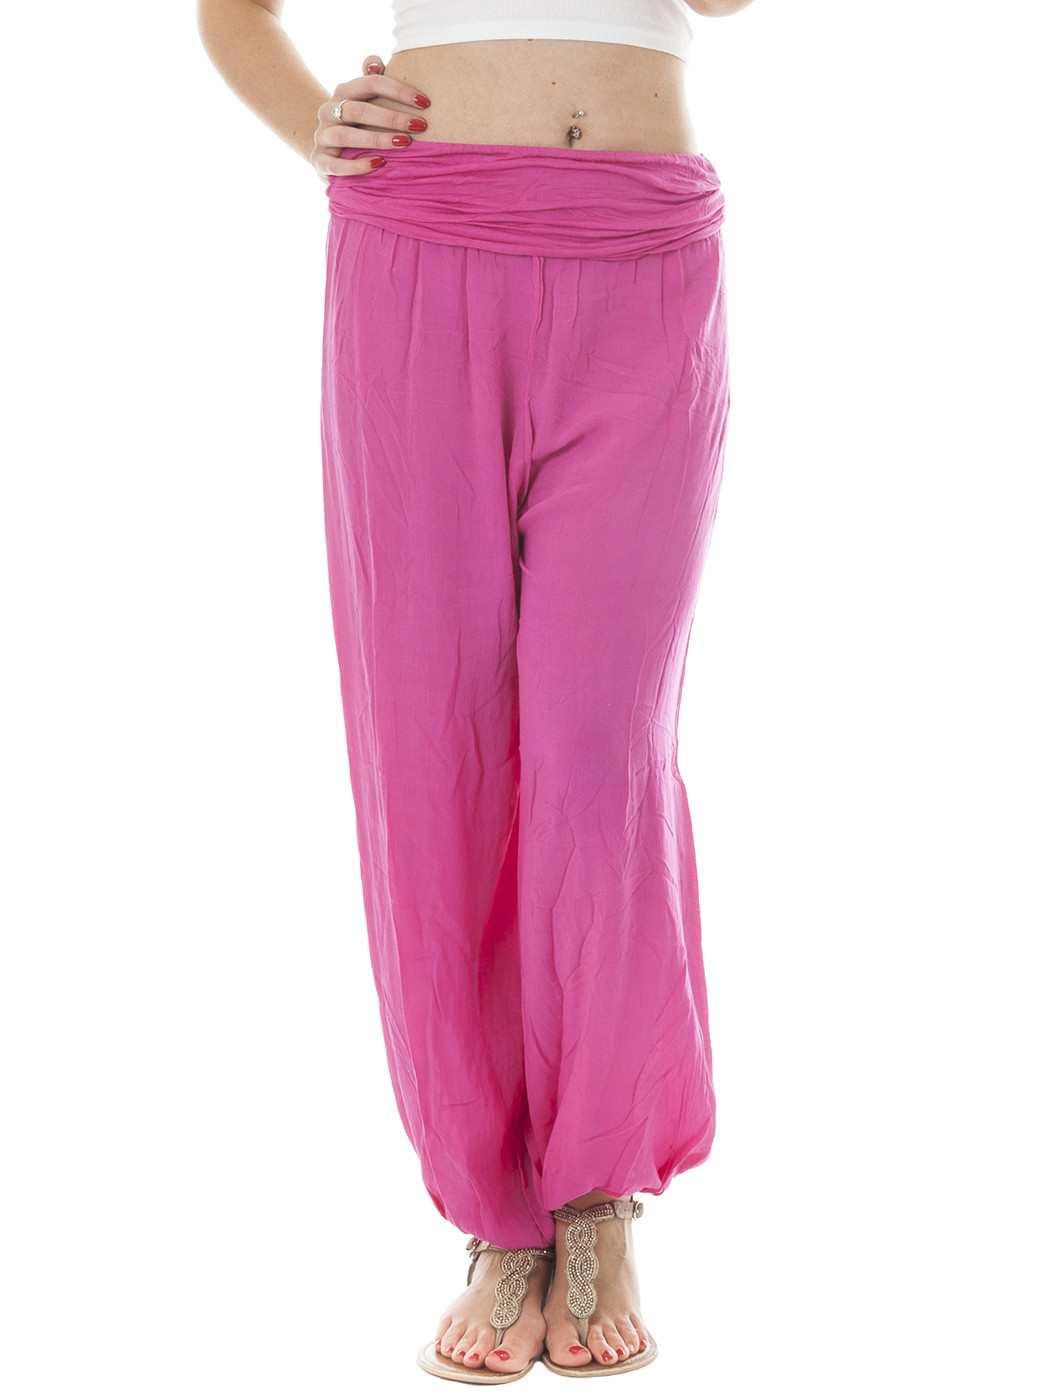 New Womens Italian Lagenlook Baggy Flowy Stretchy Harem Pants Trousers